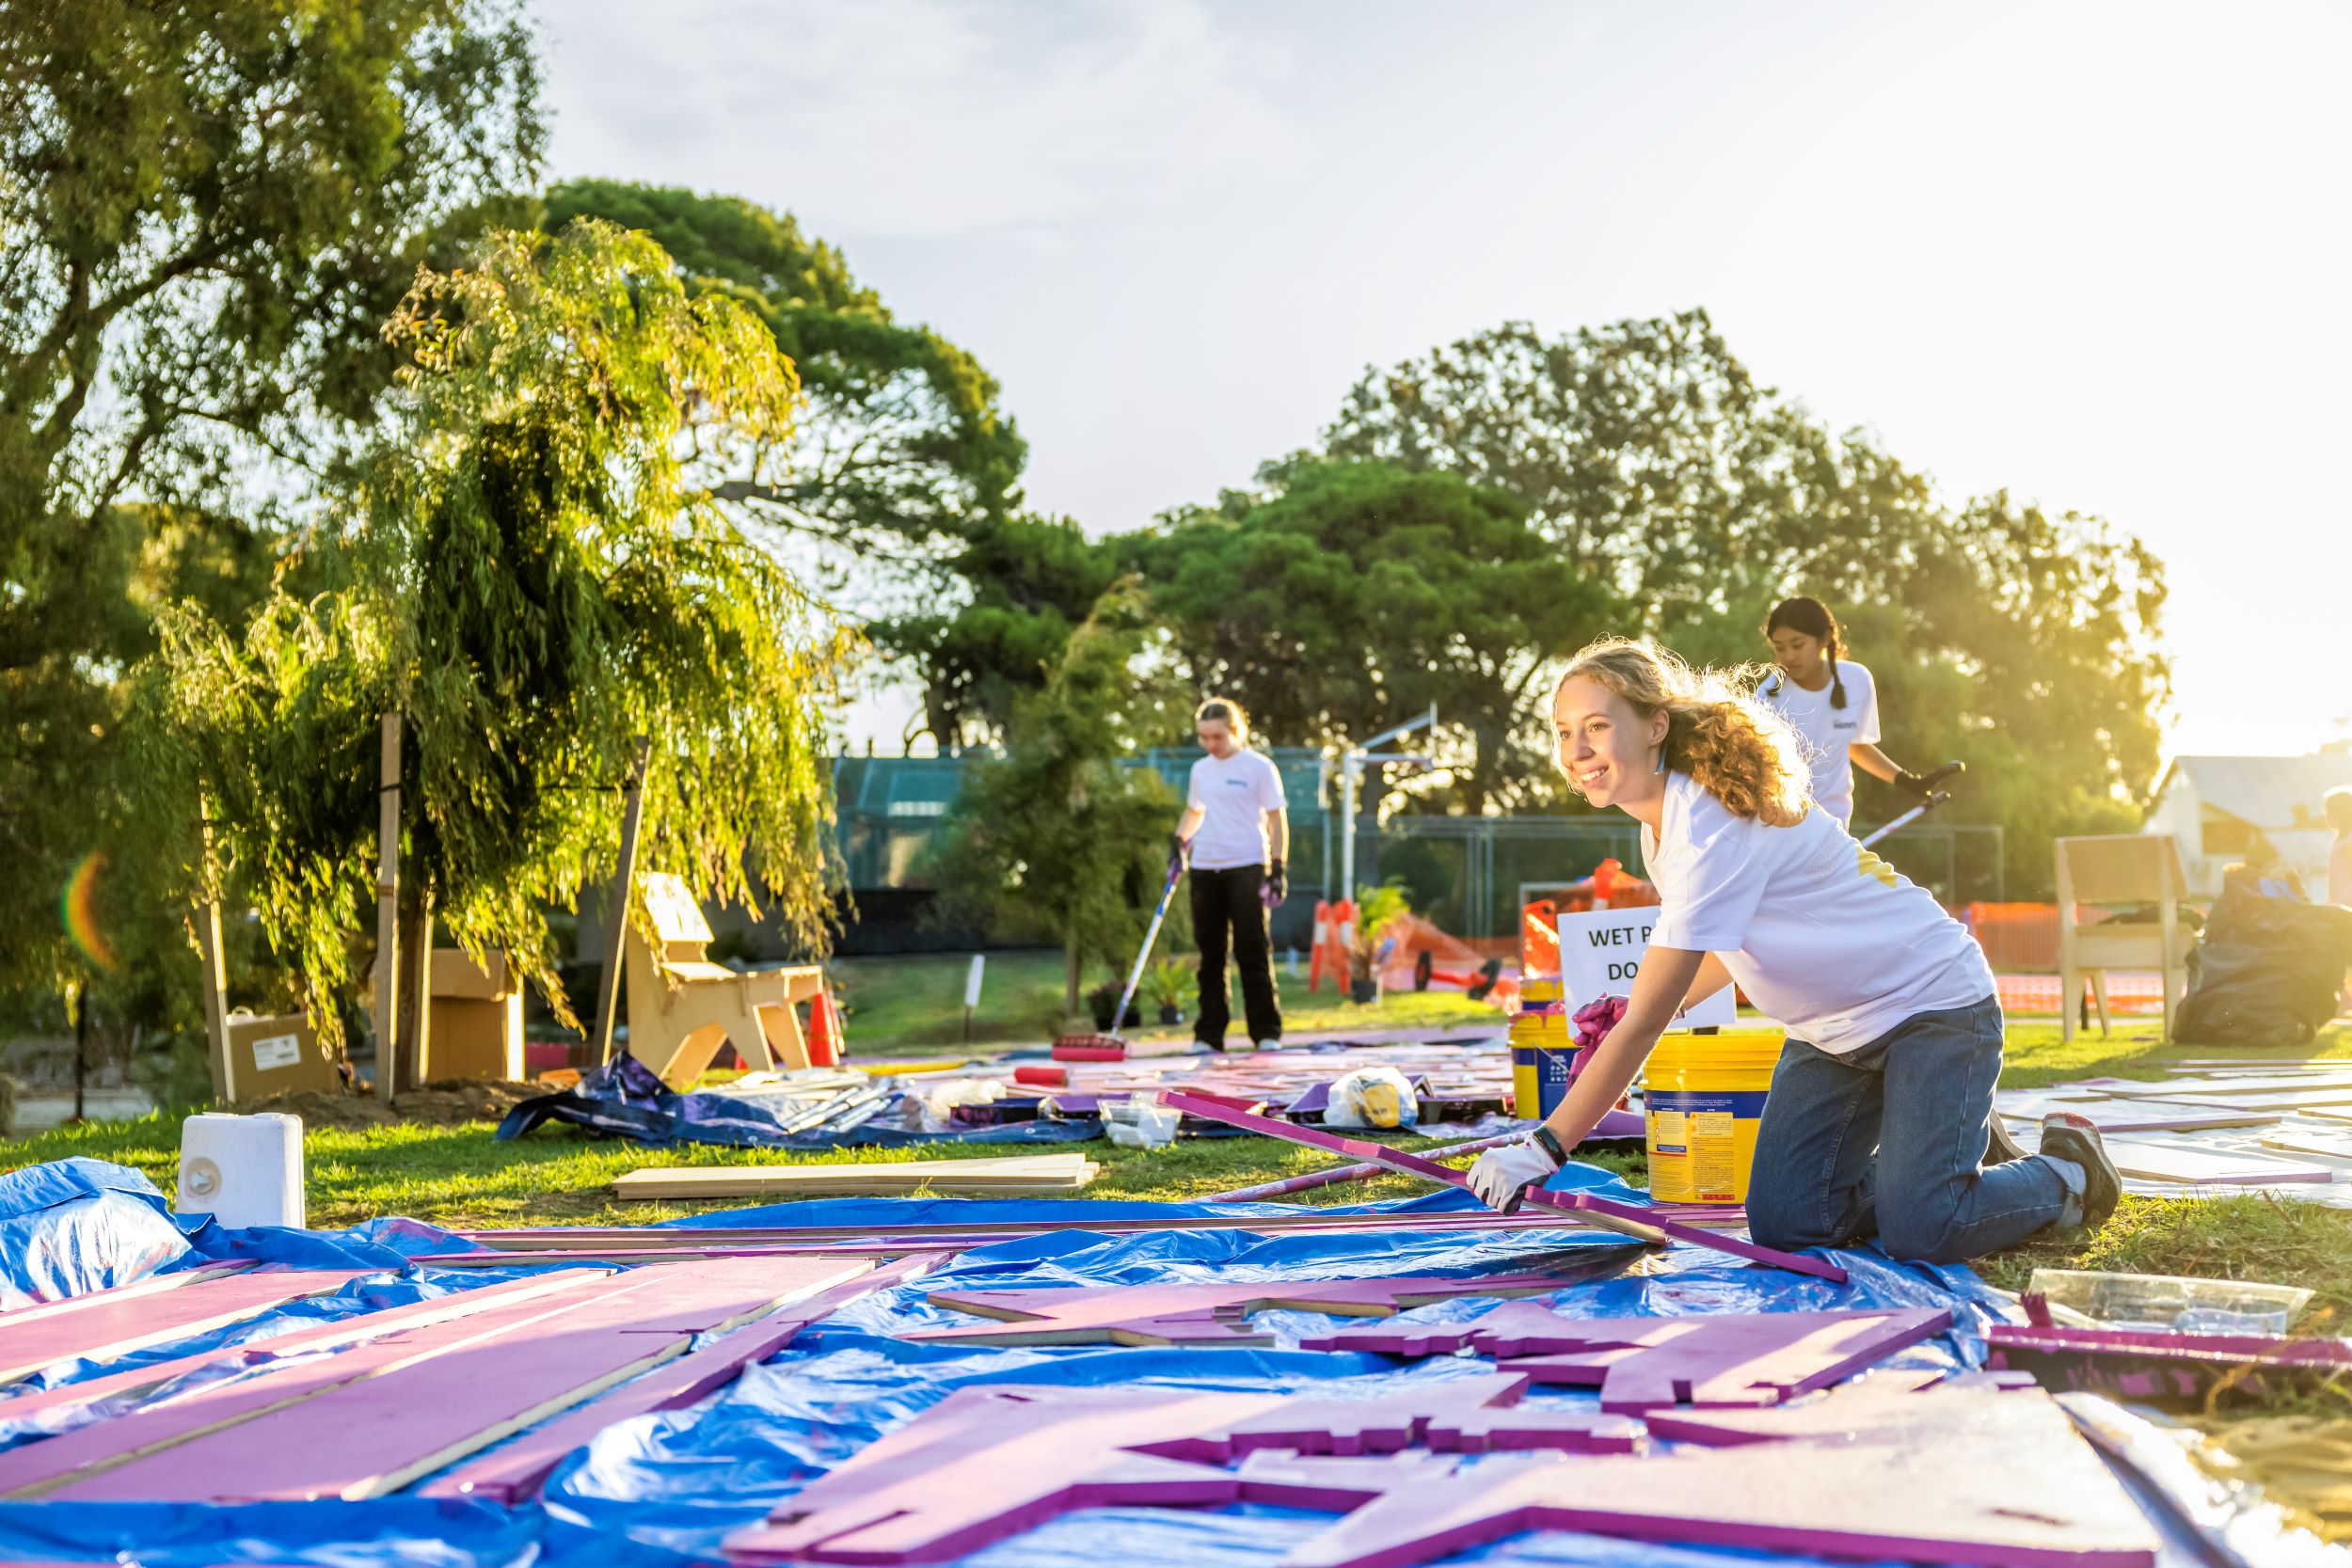 Young people paint outdoor furniture bright purple in a sunny local park